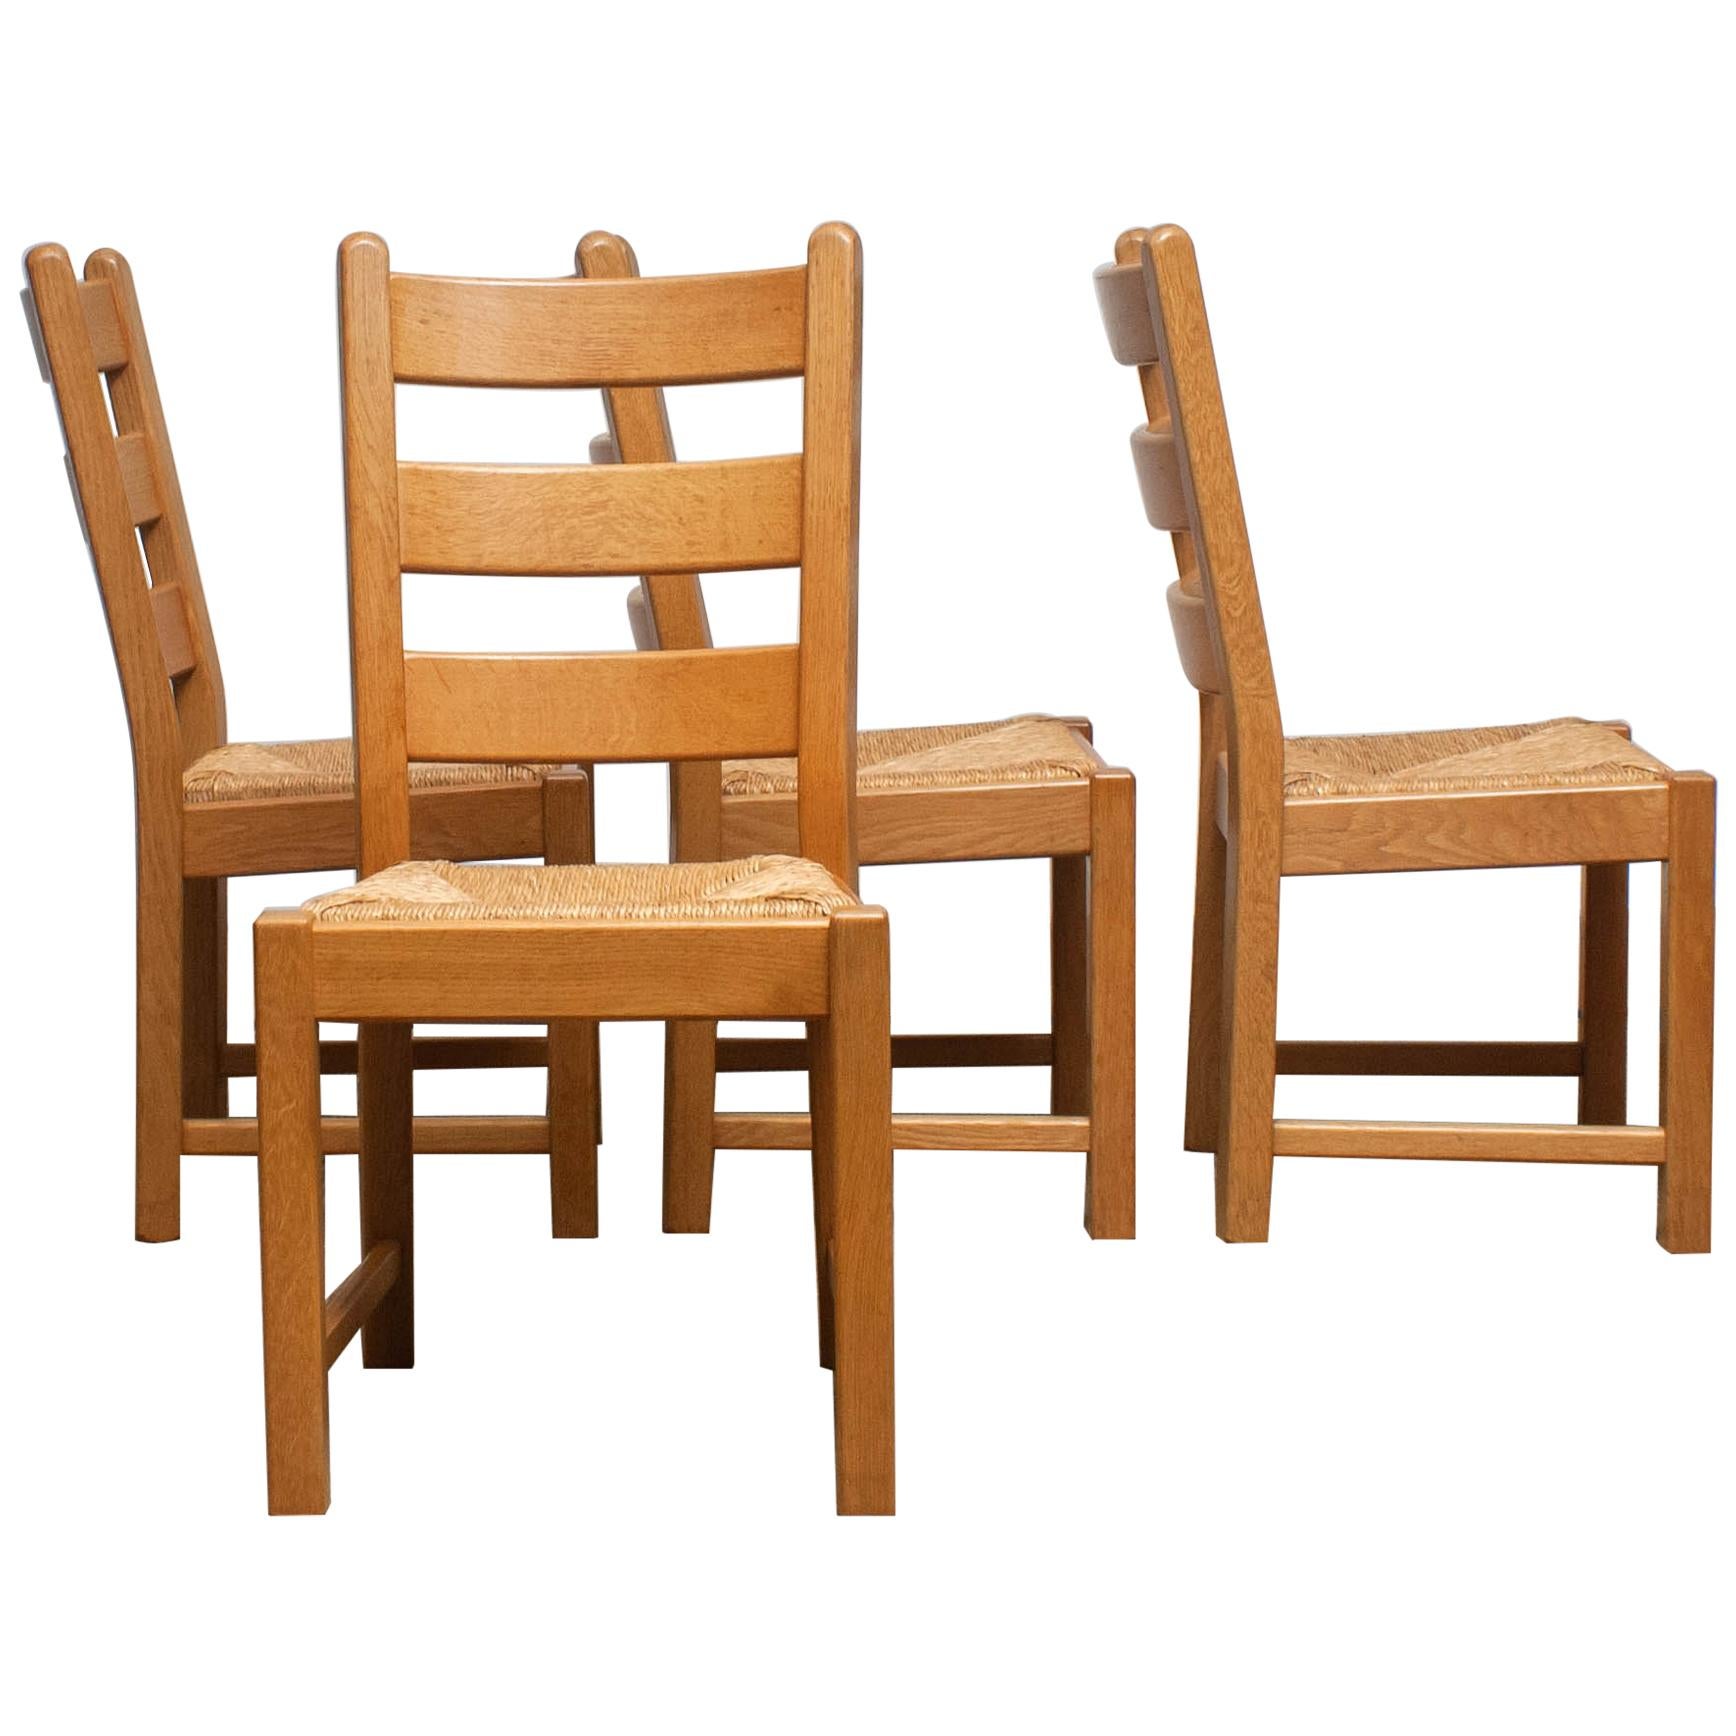 1970s, Set of Four Dutch Oak Ladder Back Dining Chairs with Wicker Seat